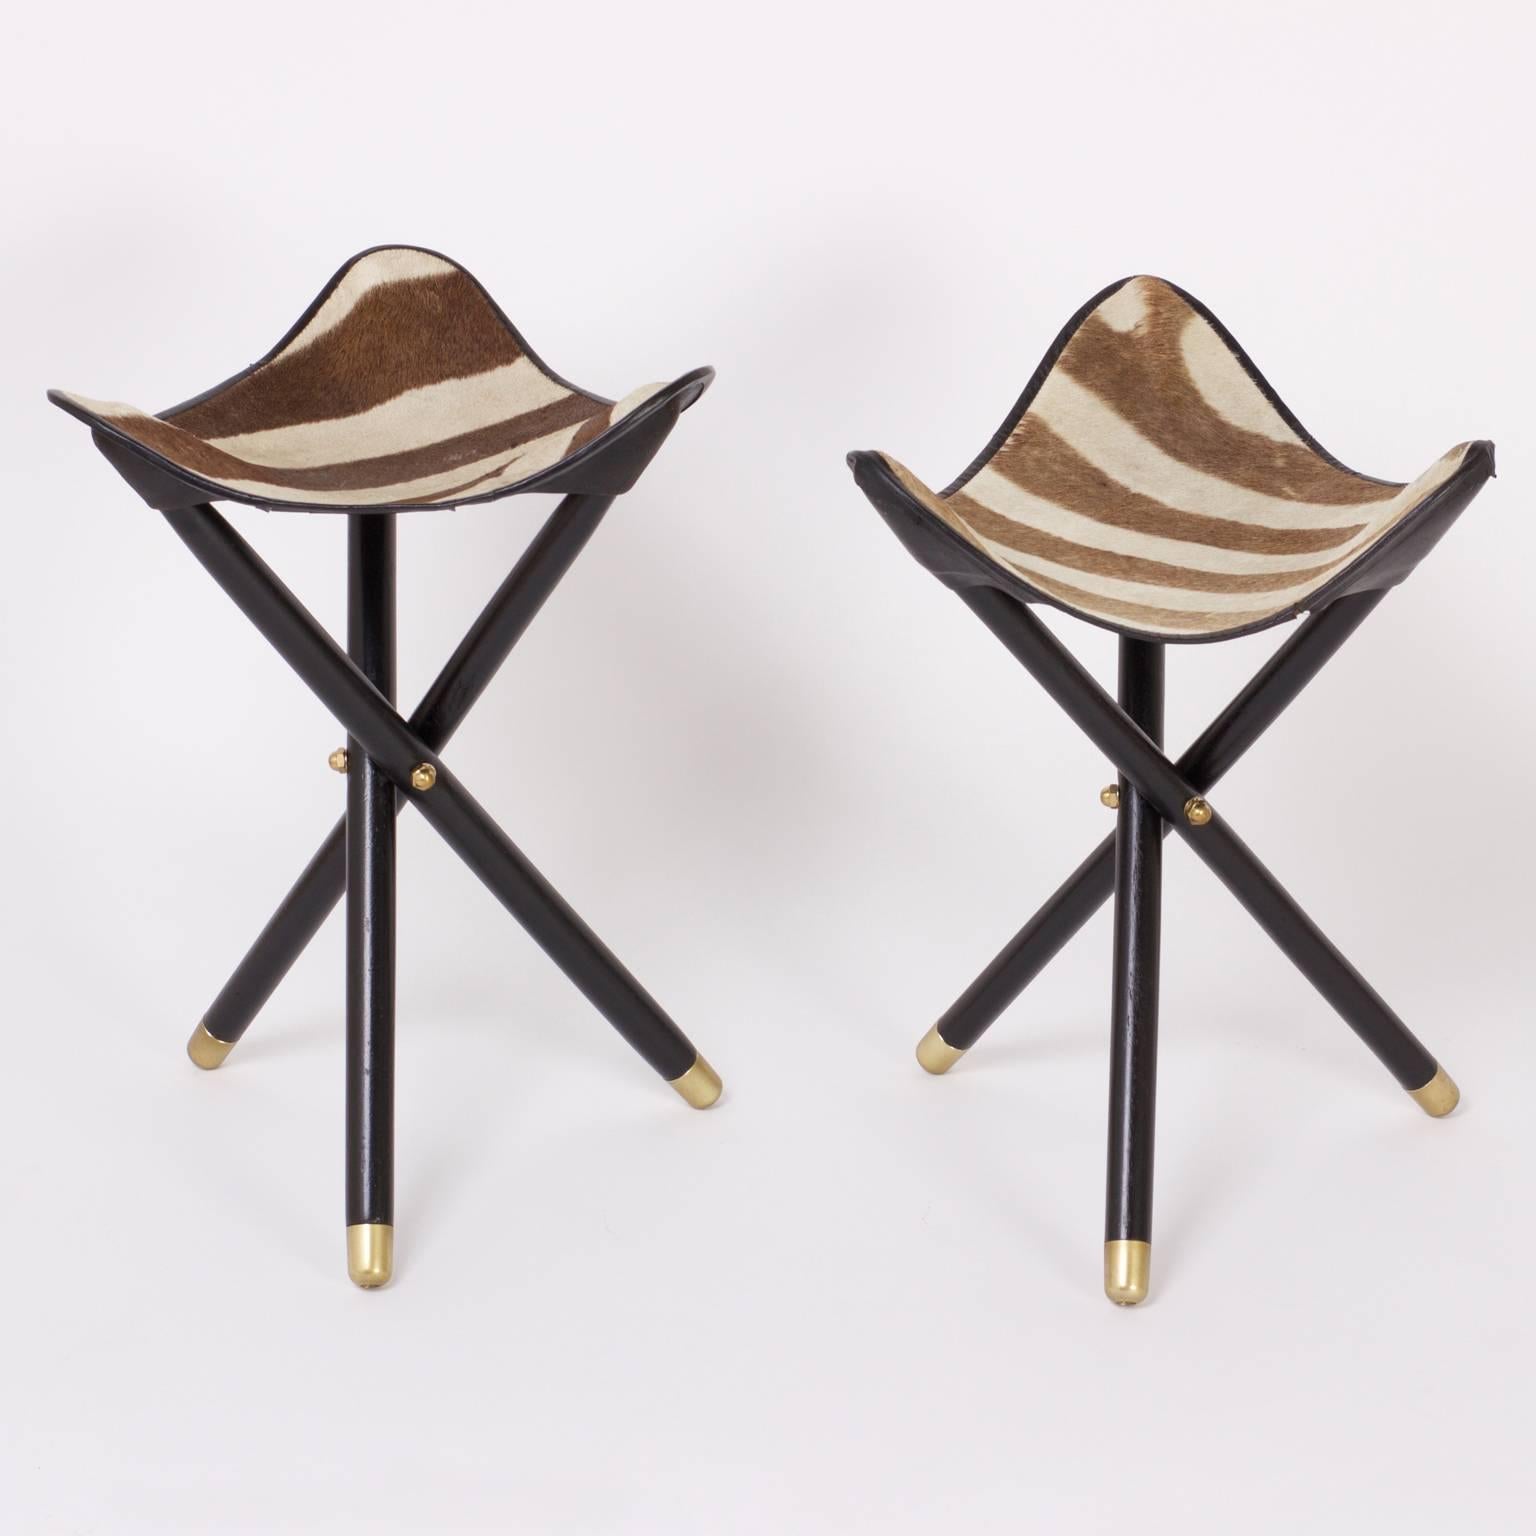 Dashing group of four of Mid-Century portable zebra stools or benches with folding tripod ebonized bases tipped with brass. One stool has a brown leather lining, note picture. Sold as a group for $5,200.00 or individually for $1,400.00 each.